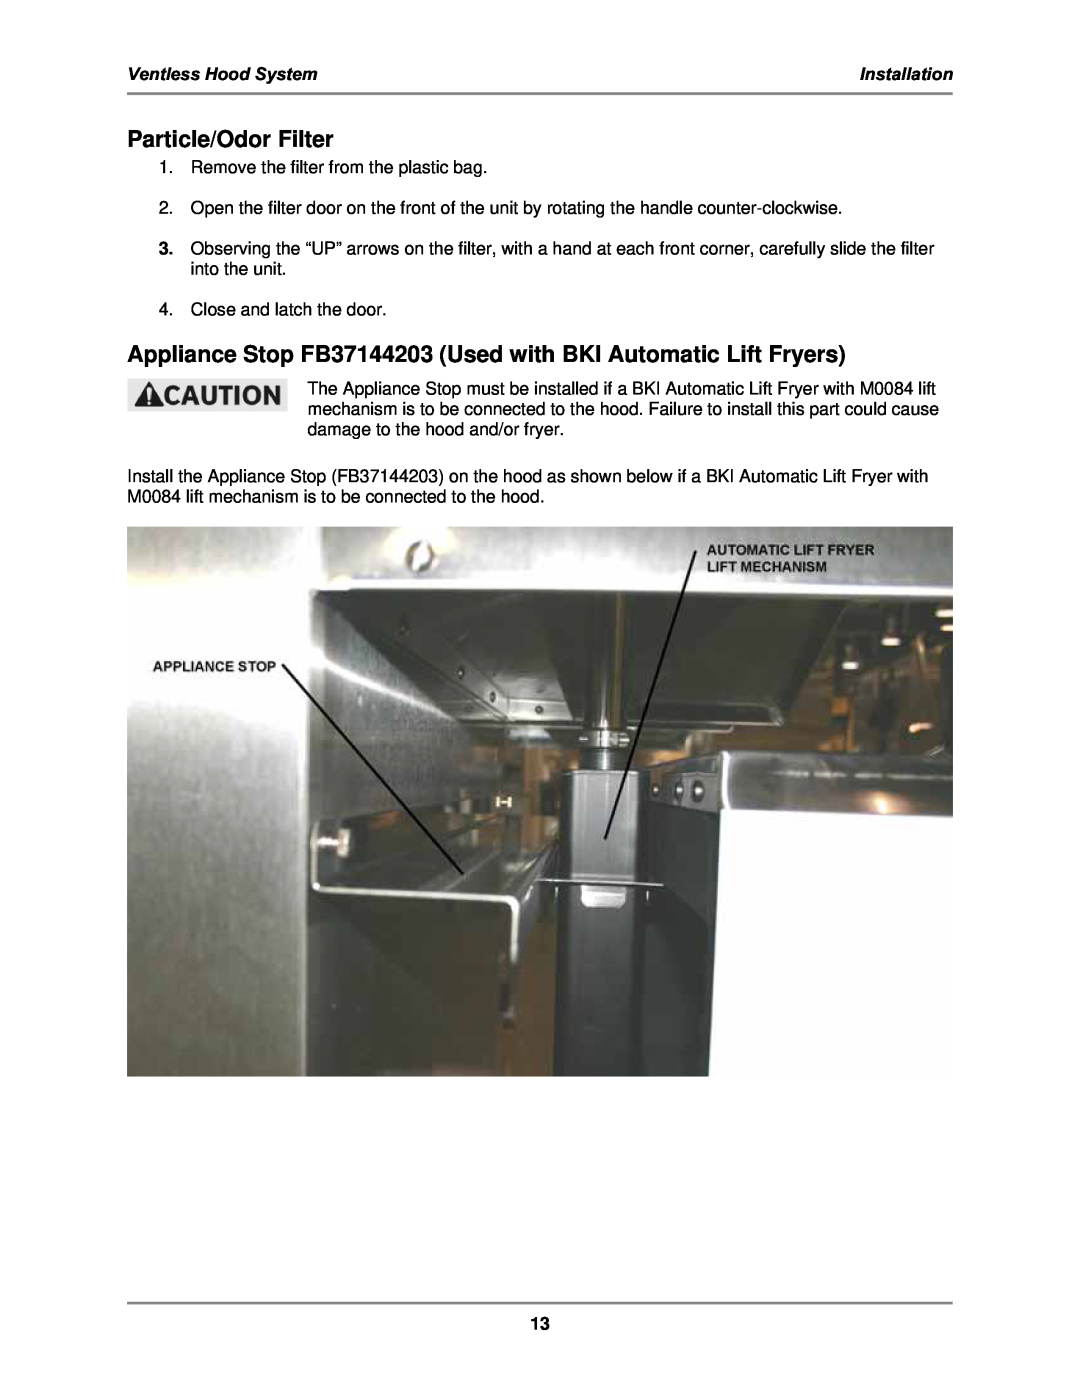 Bakers Pride Oven FH-28 operation manual Particle/Odor Filter, Ventless Hood System, Installation 